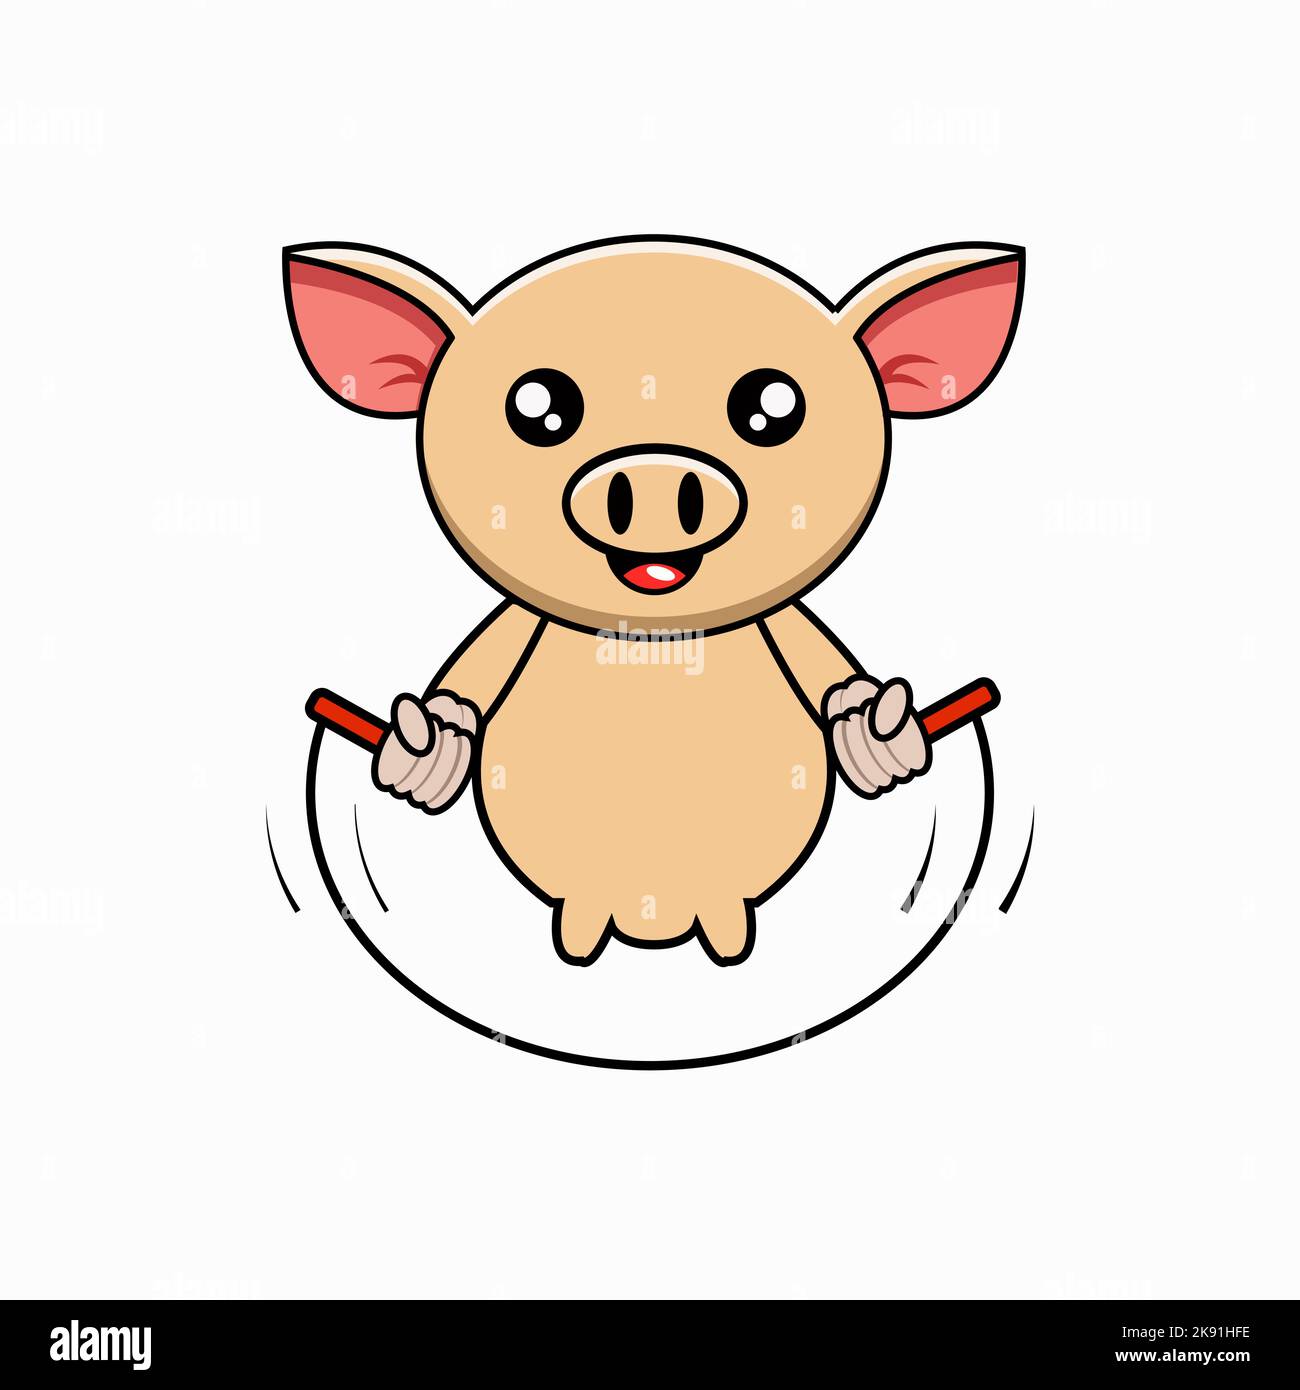 A pig exercising using a skipping rope isolated on the white background Stock Vector